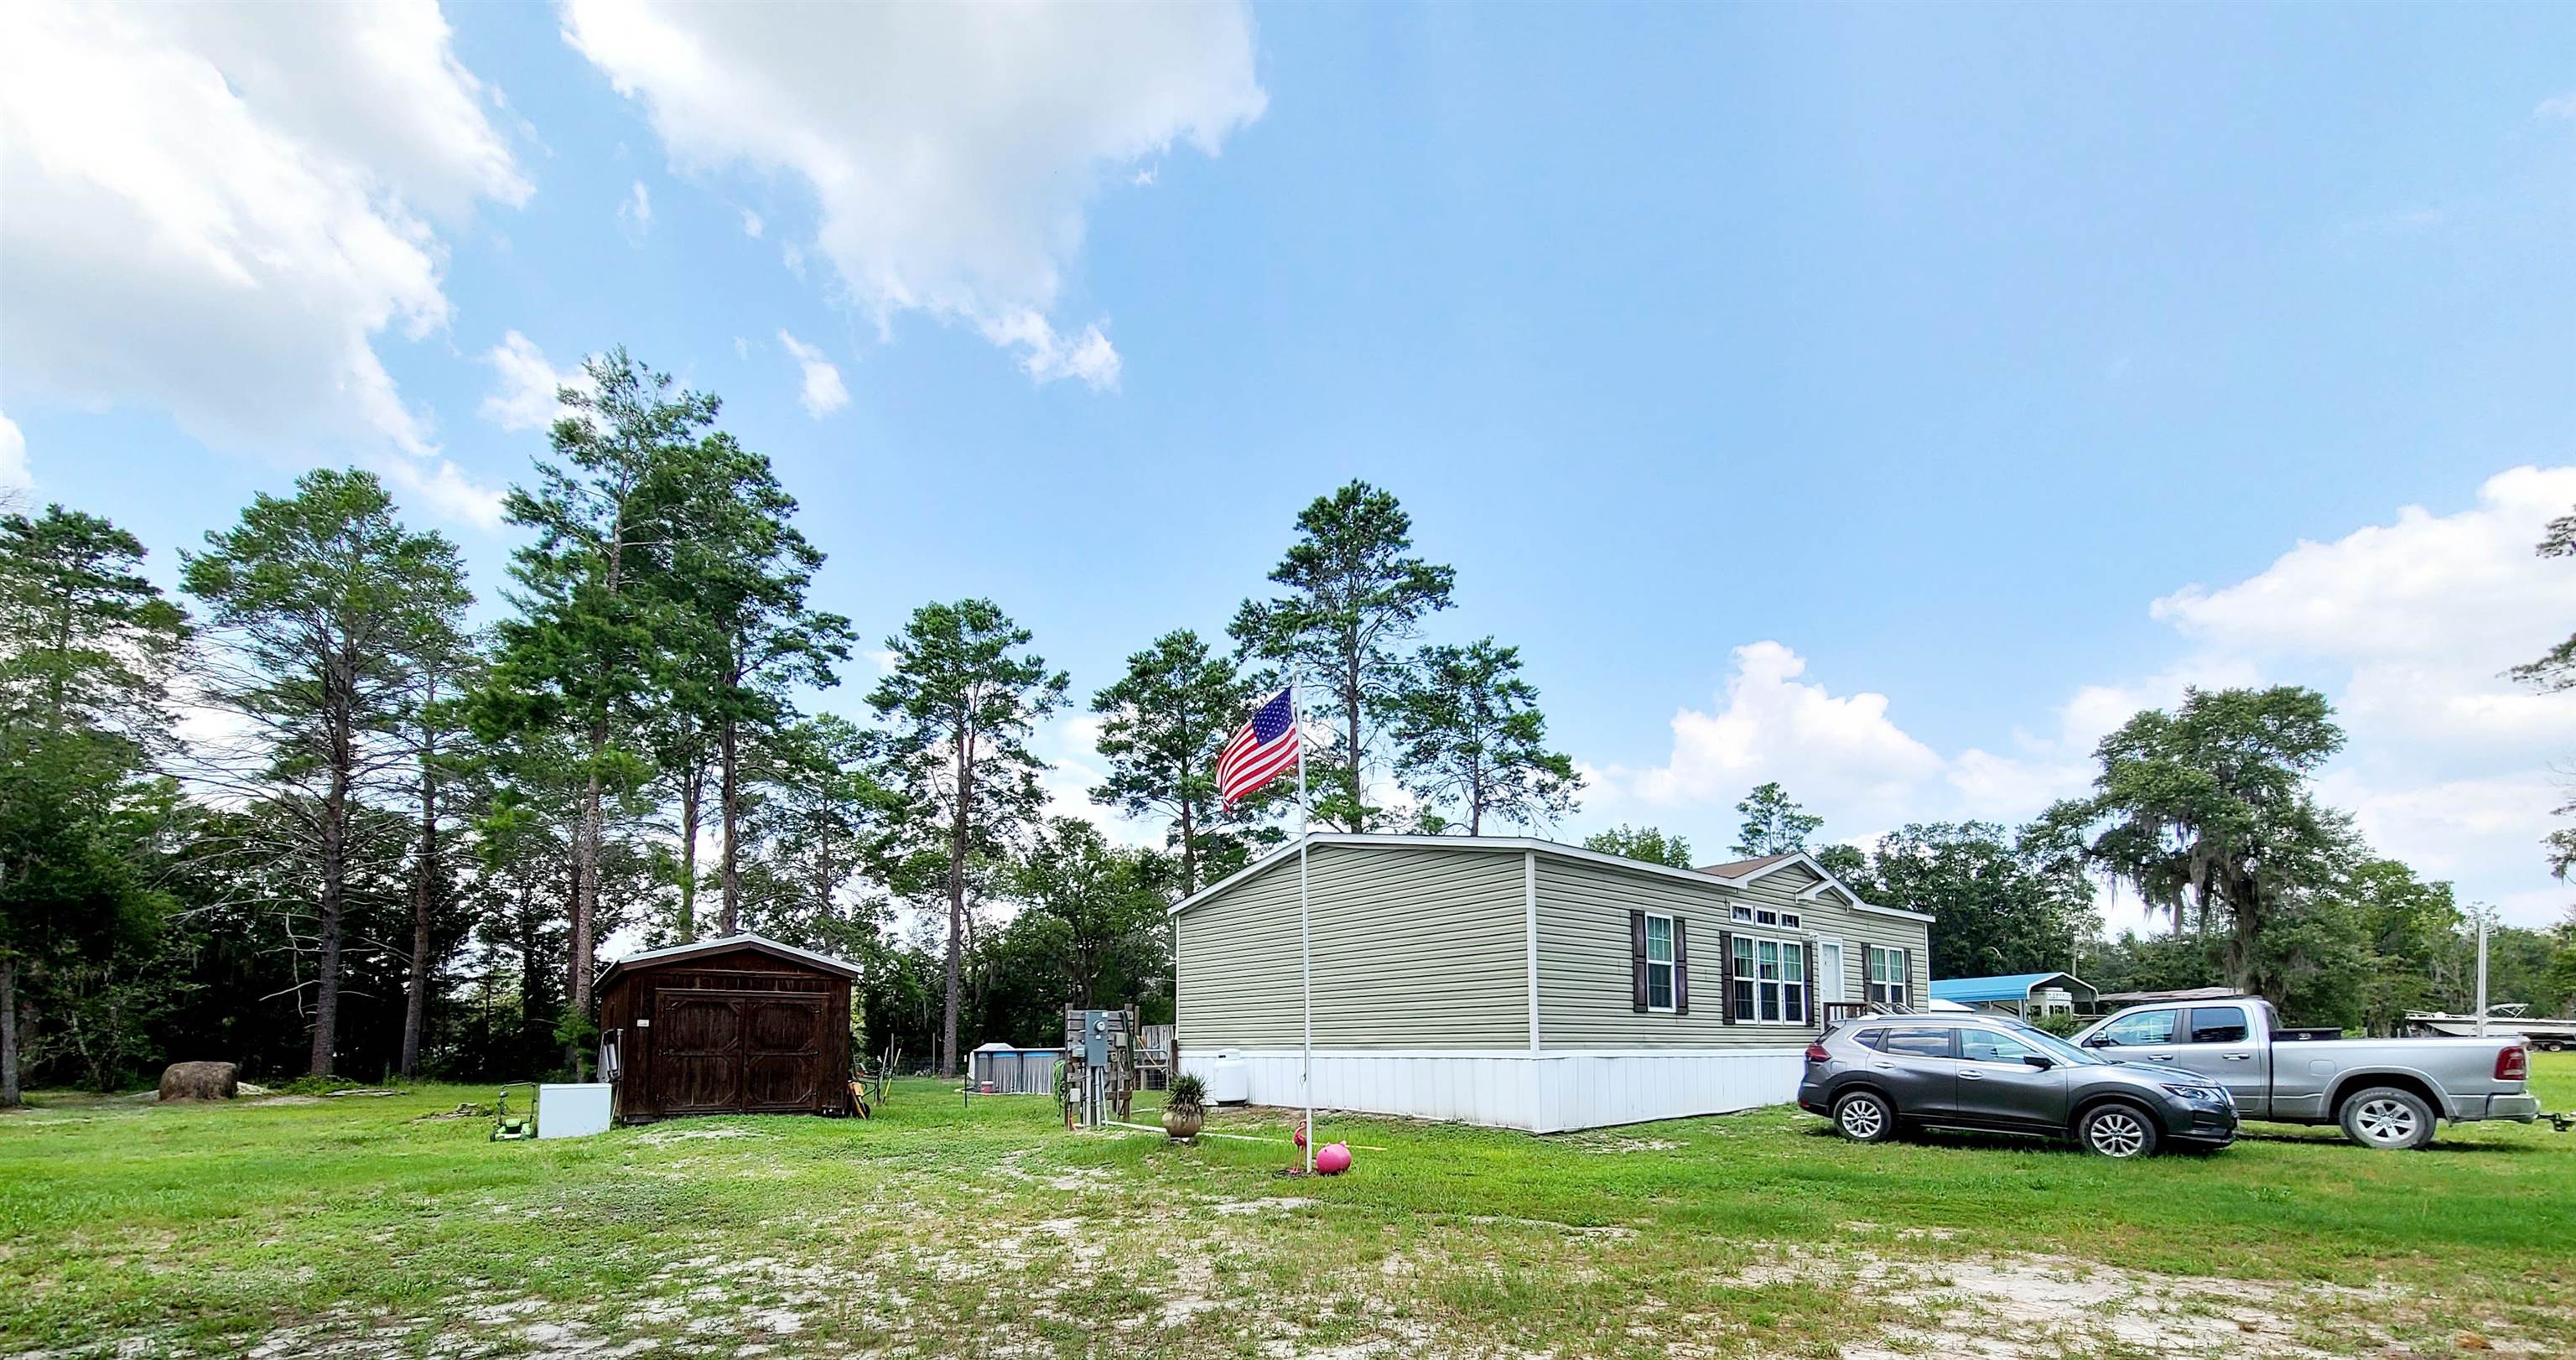 15963 Blue Crab Drive,PERRY,Florida 32348,3 Bedrooms Bedrooms,2 BathroomsBathrooms,Manuf/mobile home,15963 Blue Crab Drive,362801